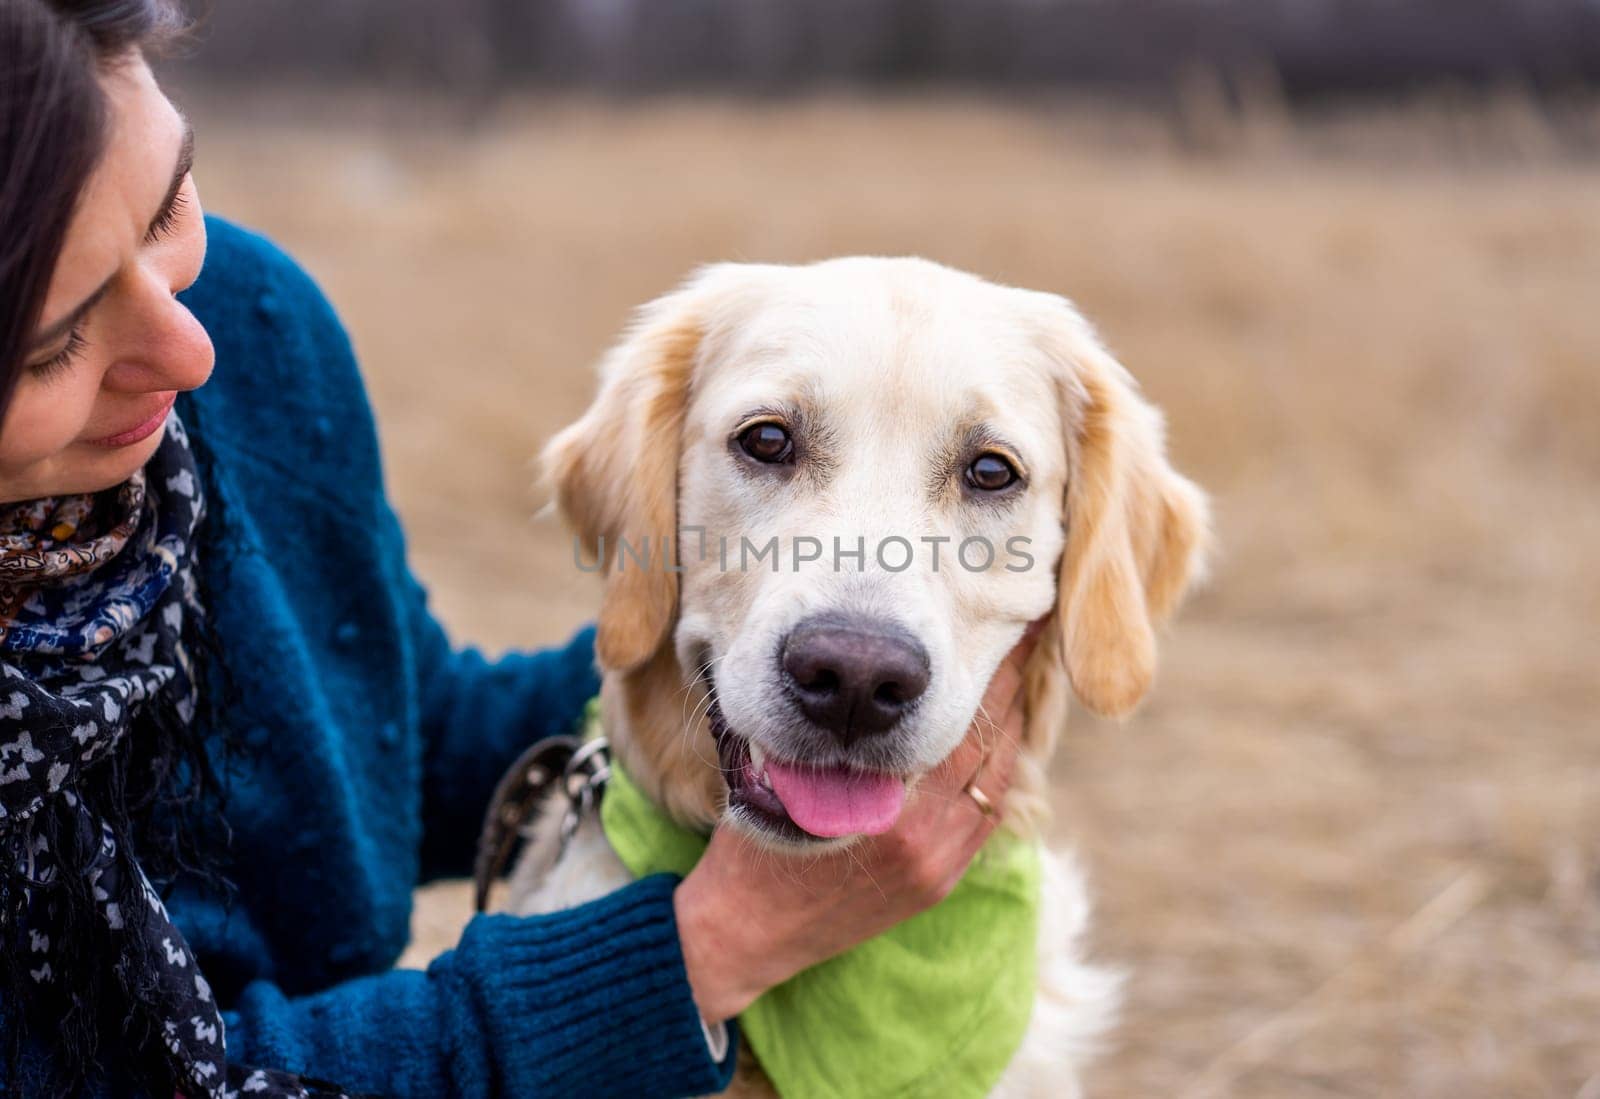 Adorable dog with lovely owner outside